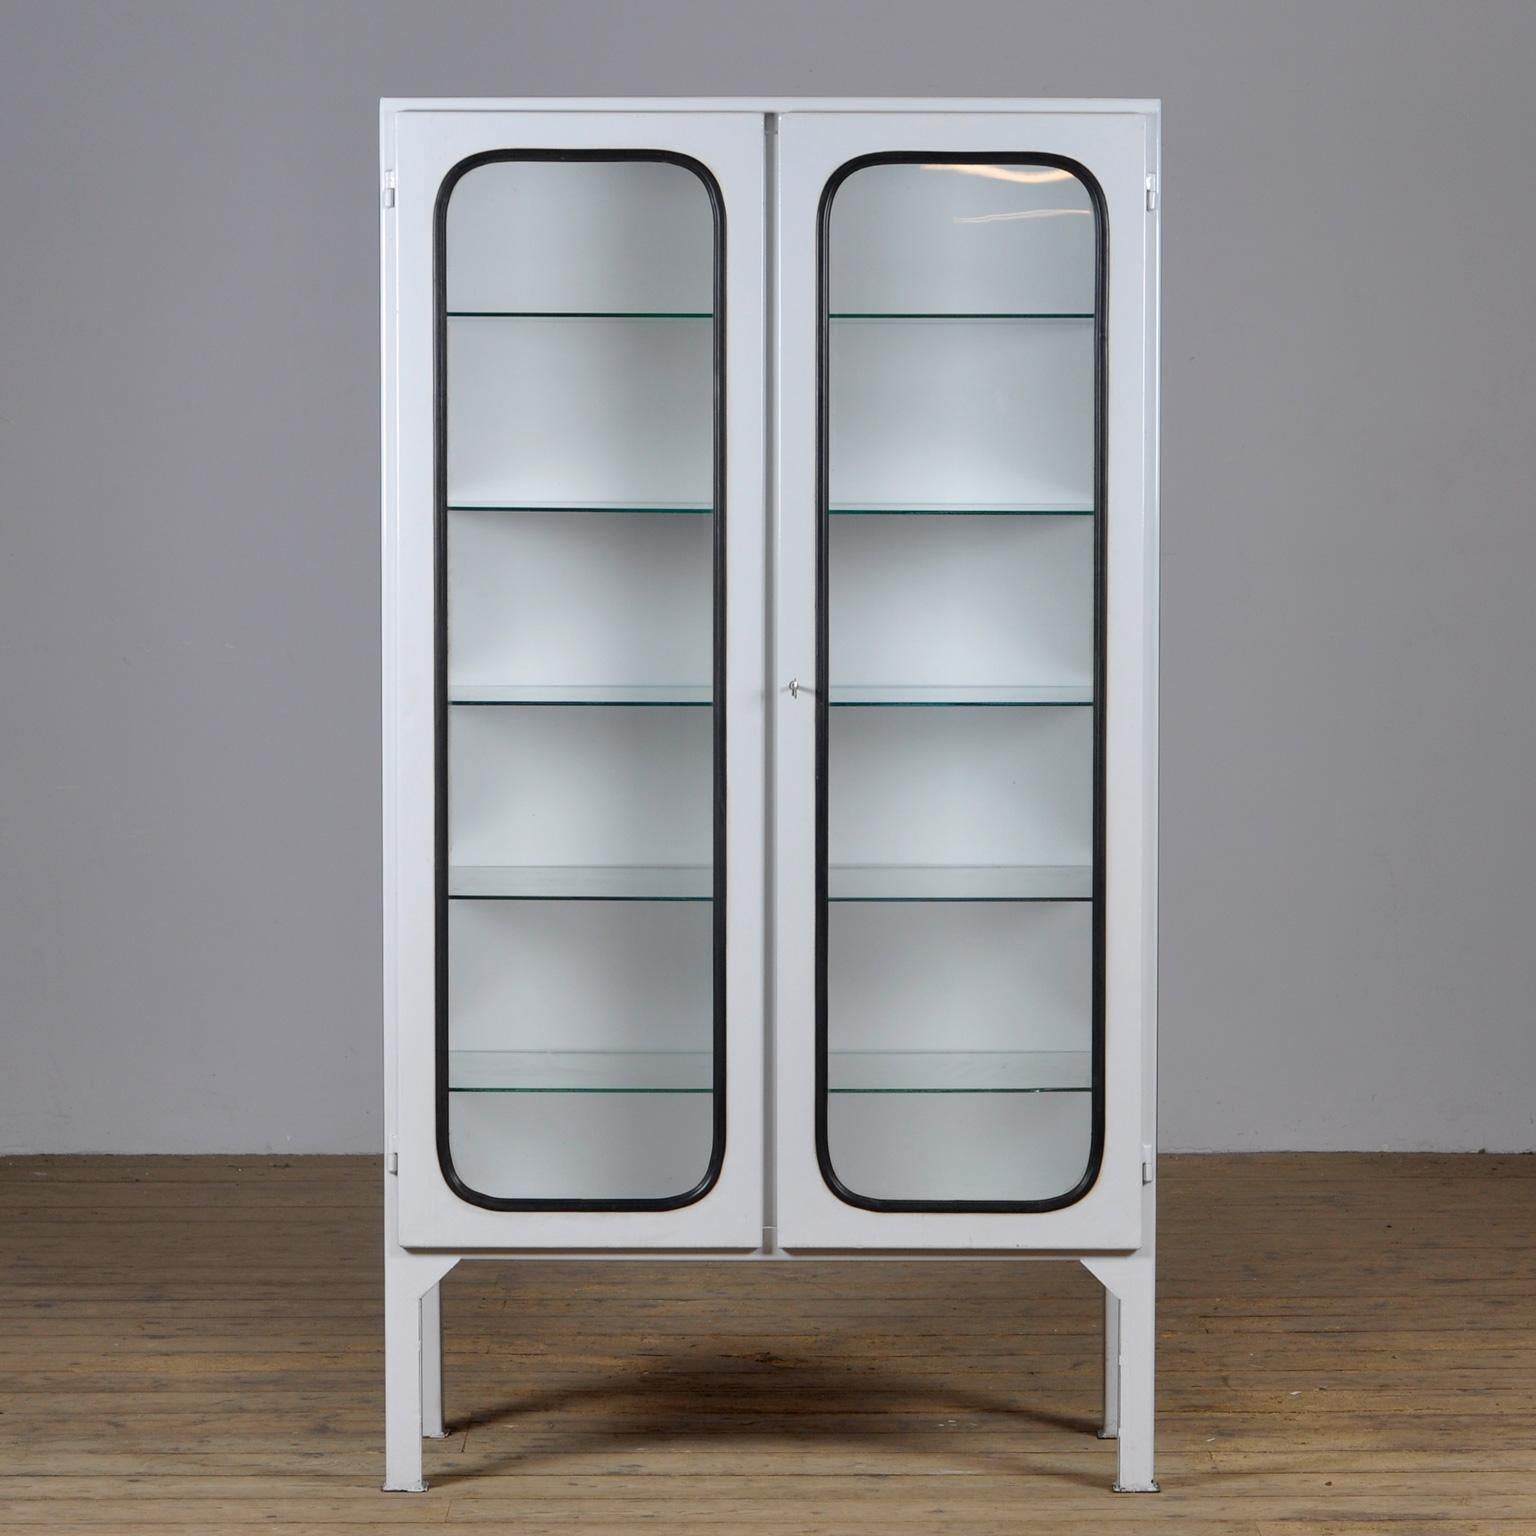 This medical cabinet was designed in the 1970s and was produced circa 1975 in hungary. It is made from iron and glass, and the glass is held by a black rubber strip. The cabinet features five adjustable glass shelves and a functioning lock. 